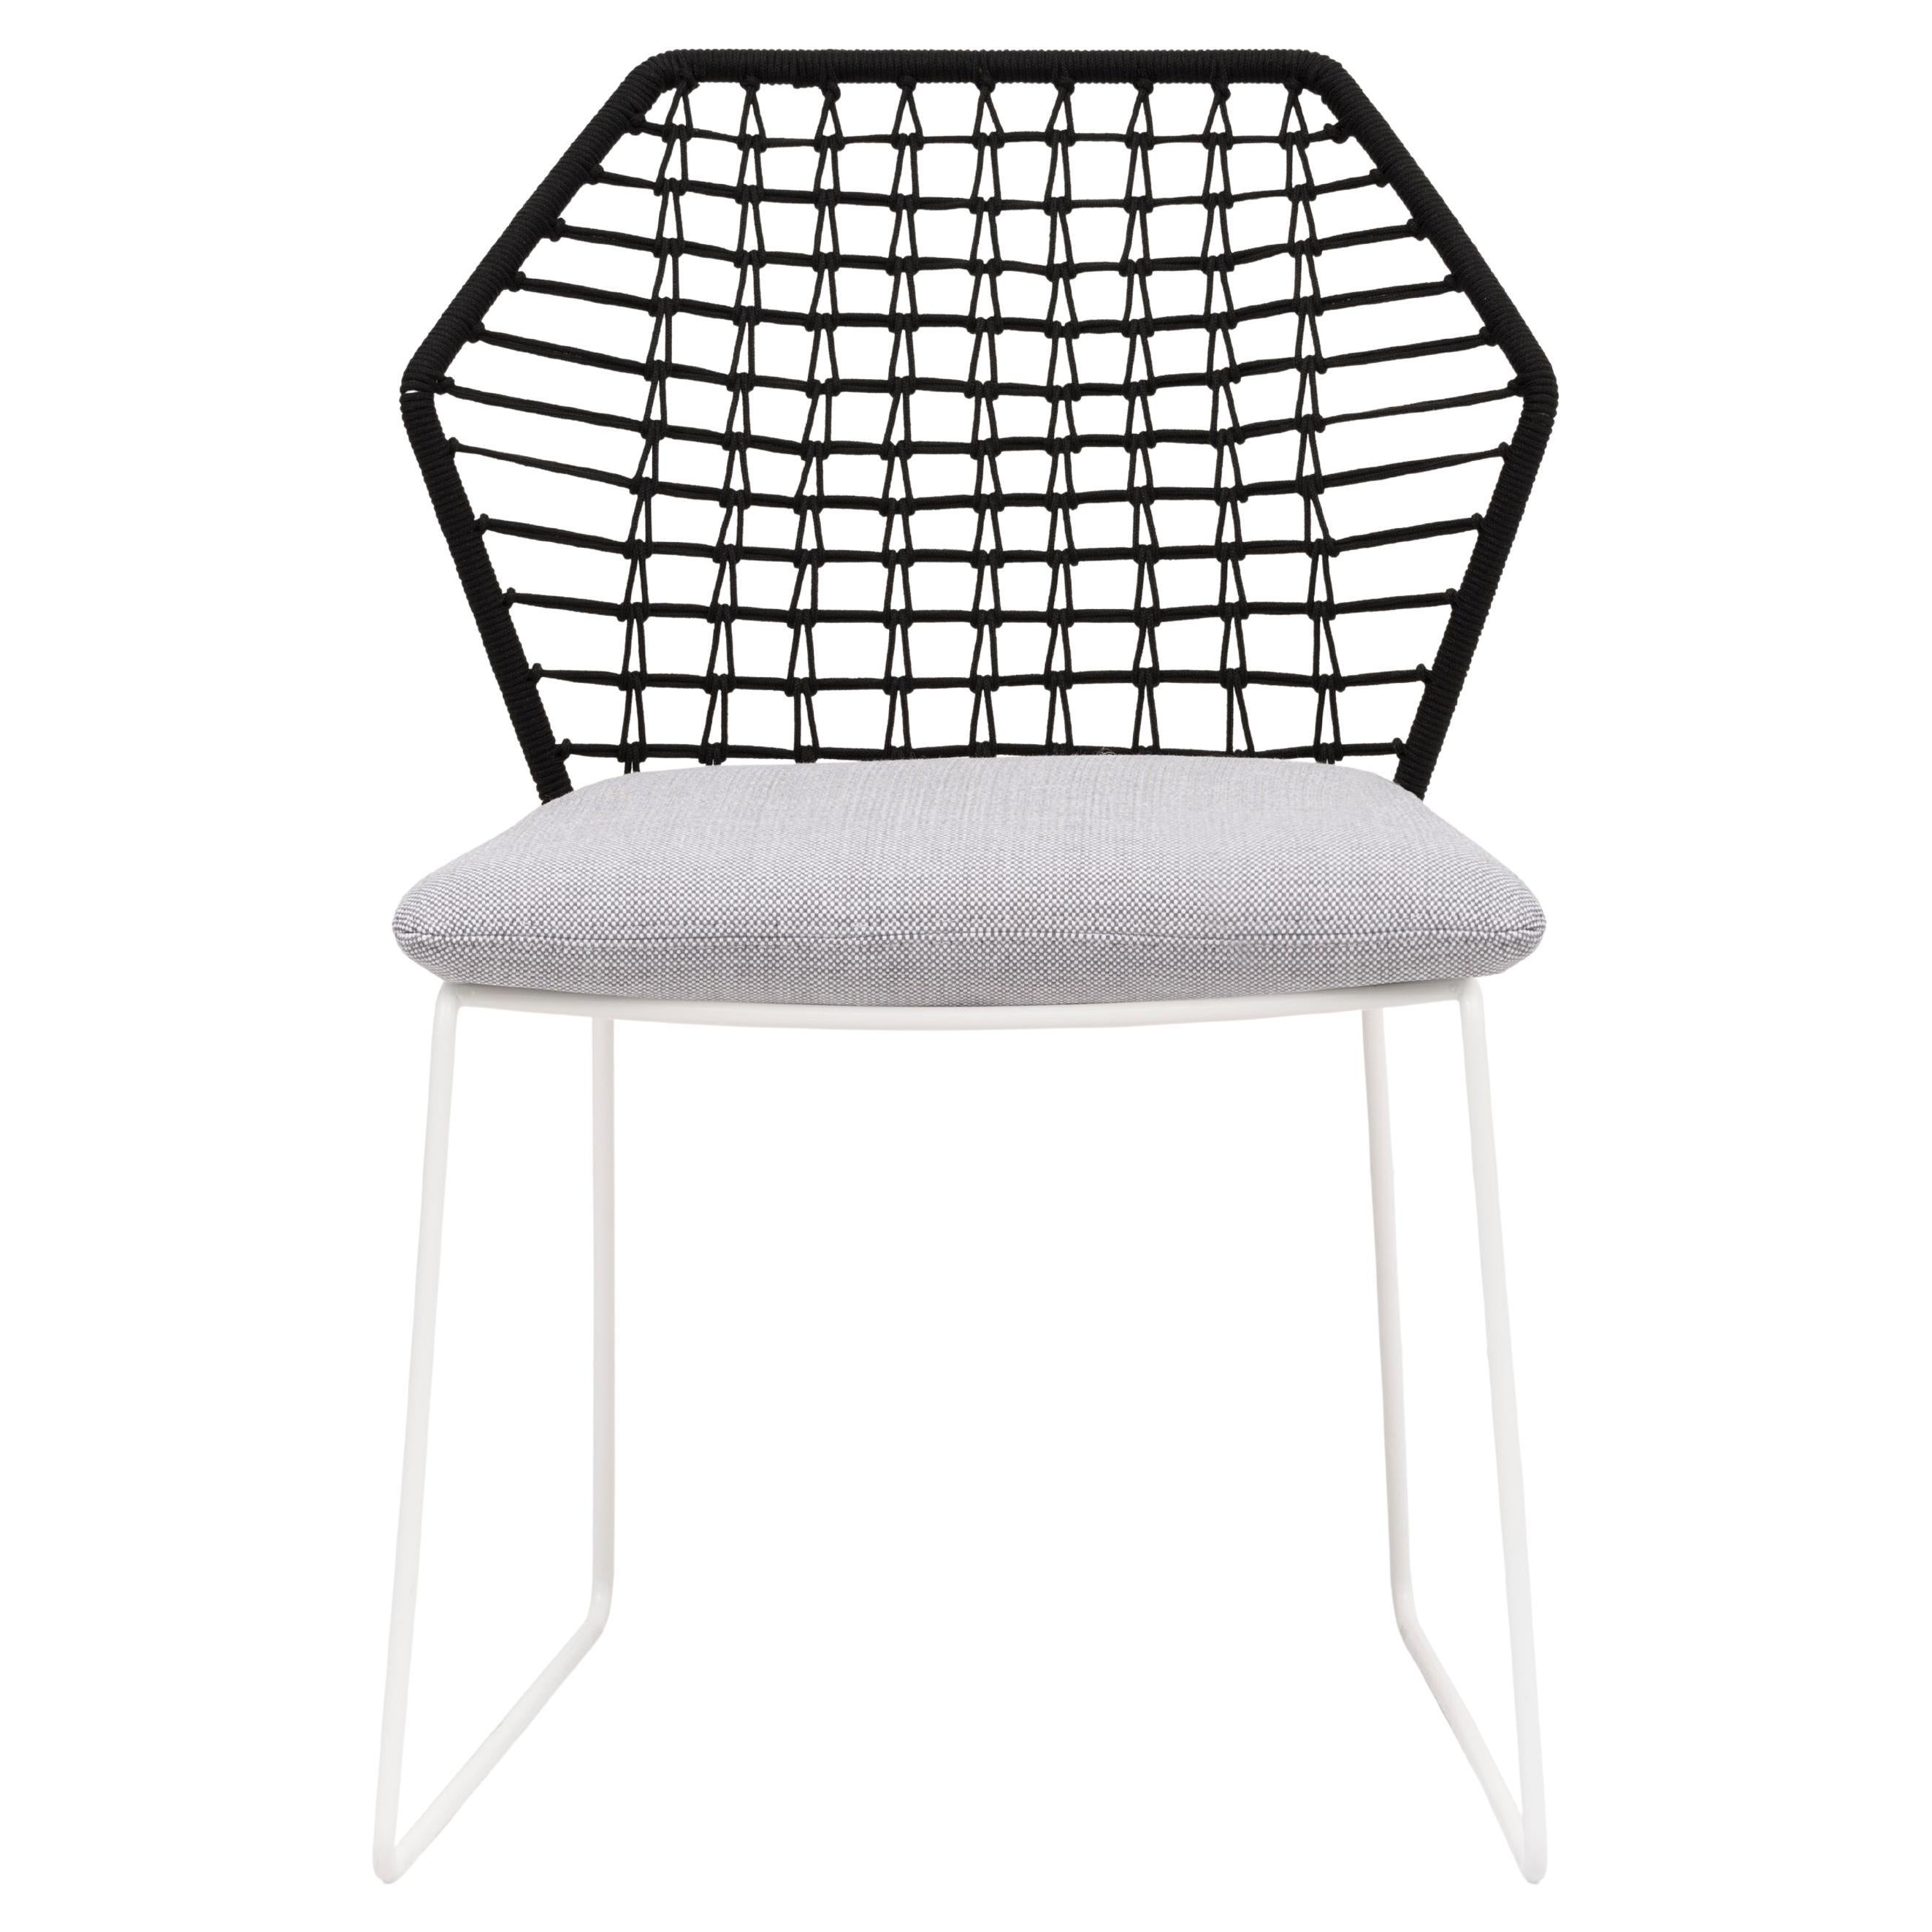 New York Soleil Chair with Black Rope Frame & White Legs by Sergio Bicego